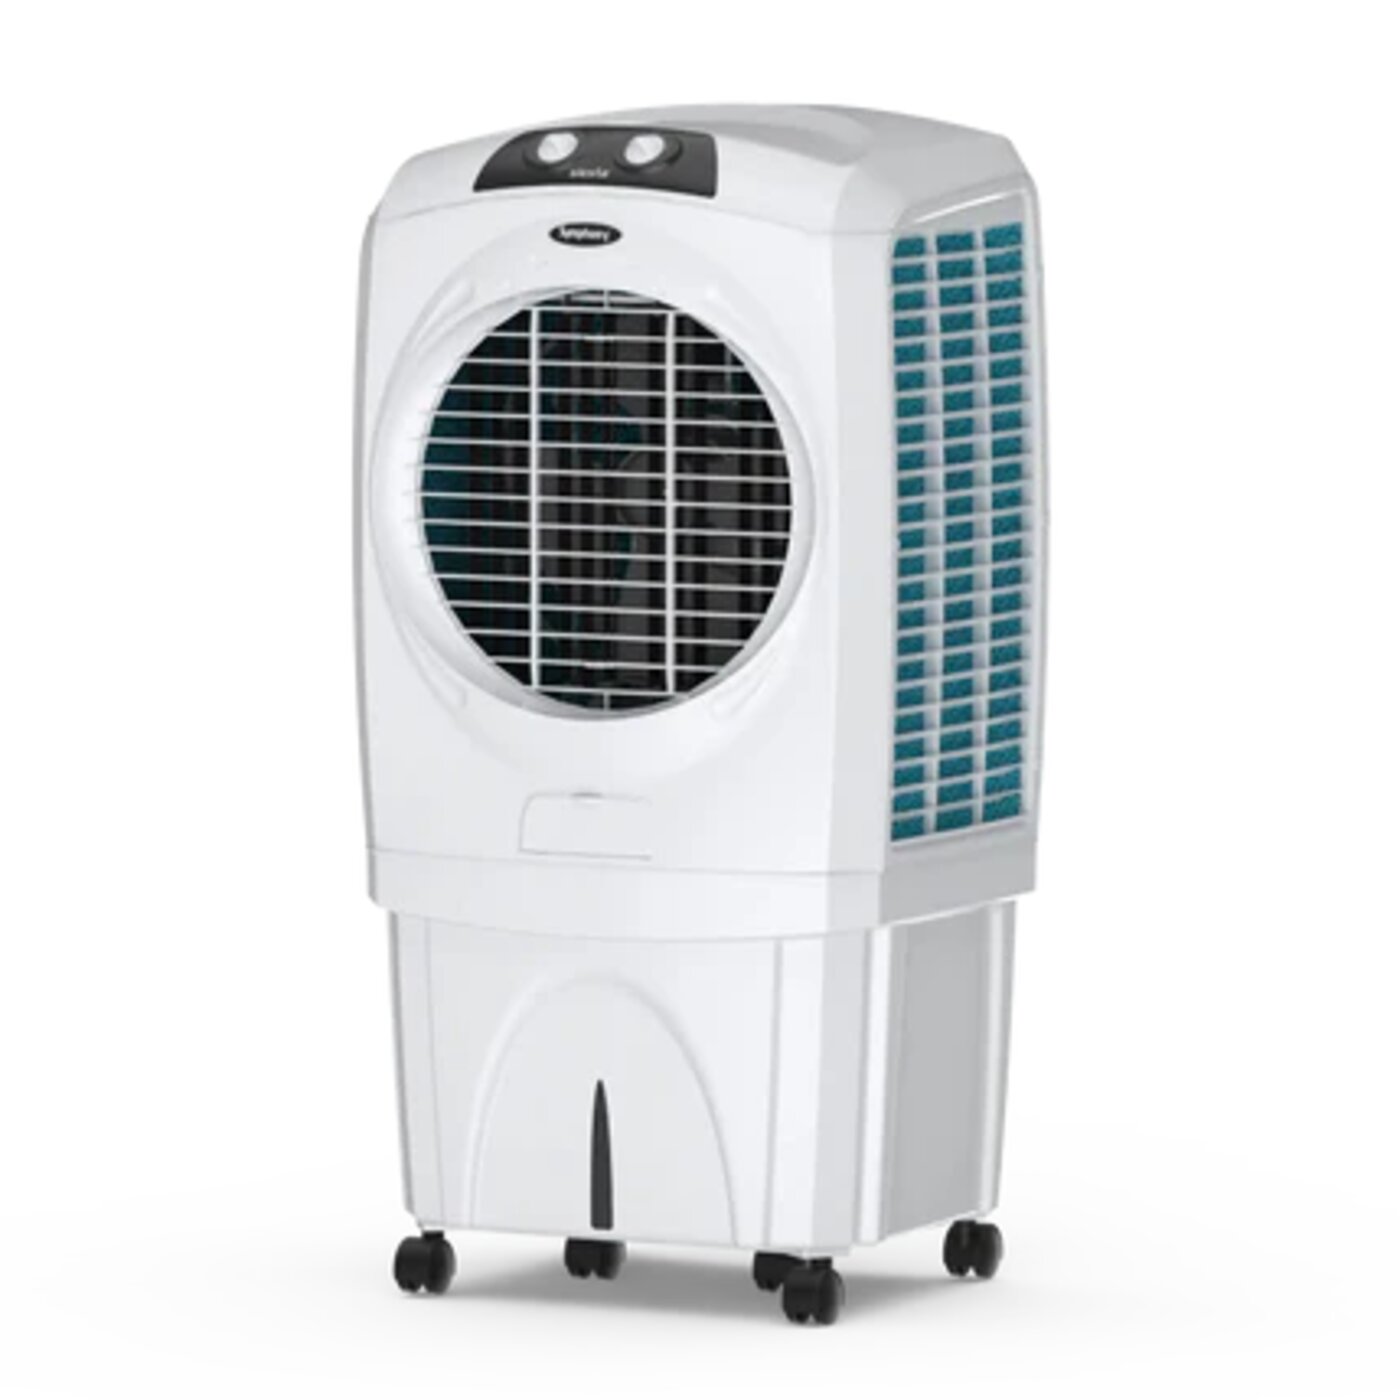 Symphony Air Cooler in Indore